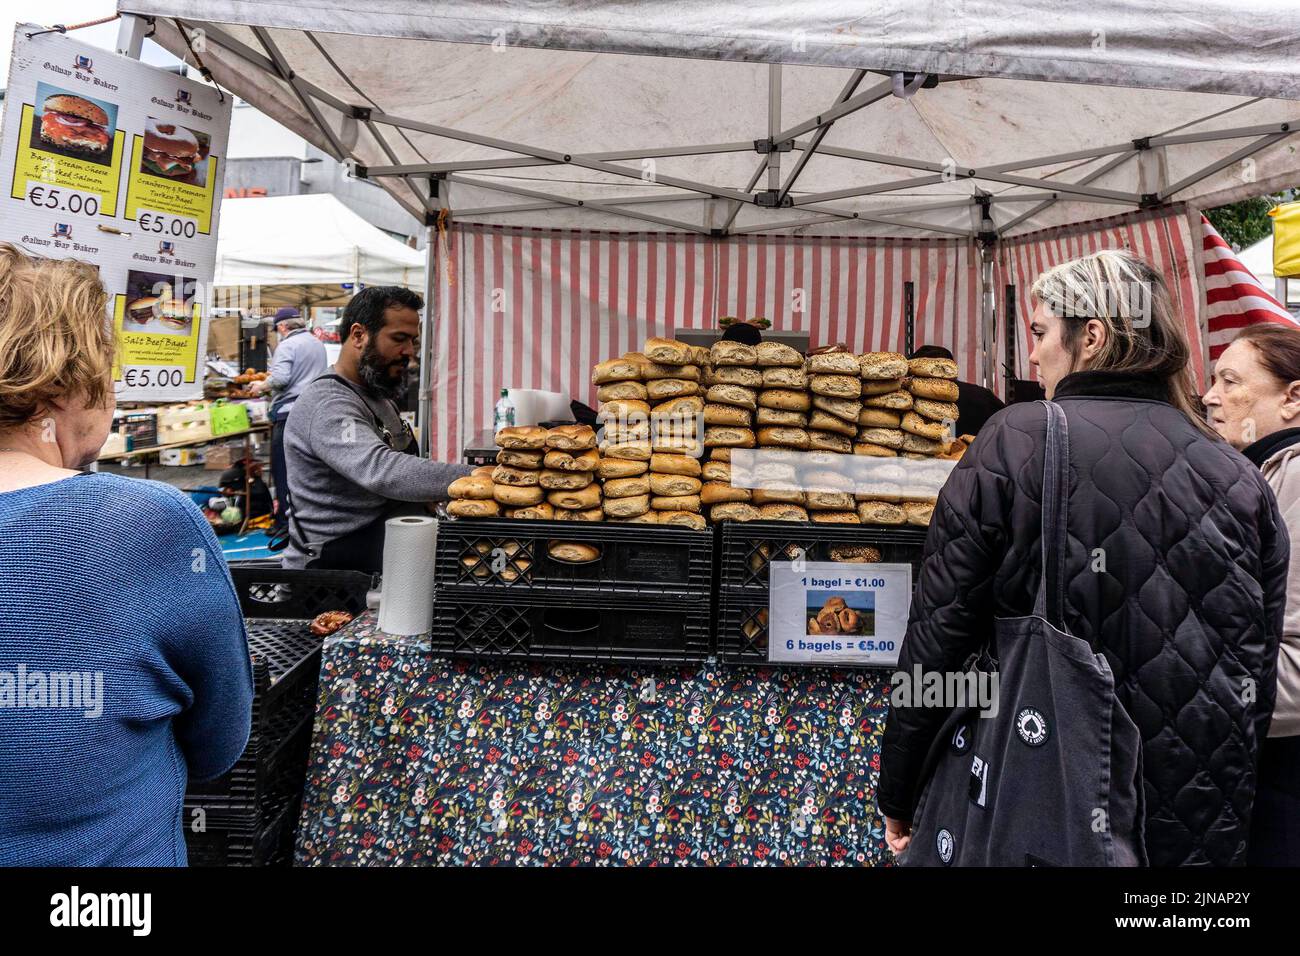 Queuing for bread at a market stall at St Nicholas Church in Galway, Ireland. Stock Photo